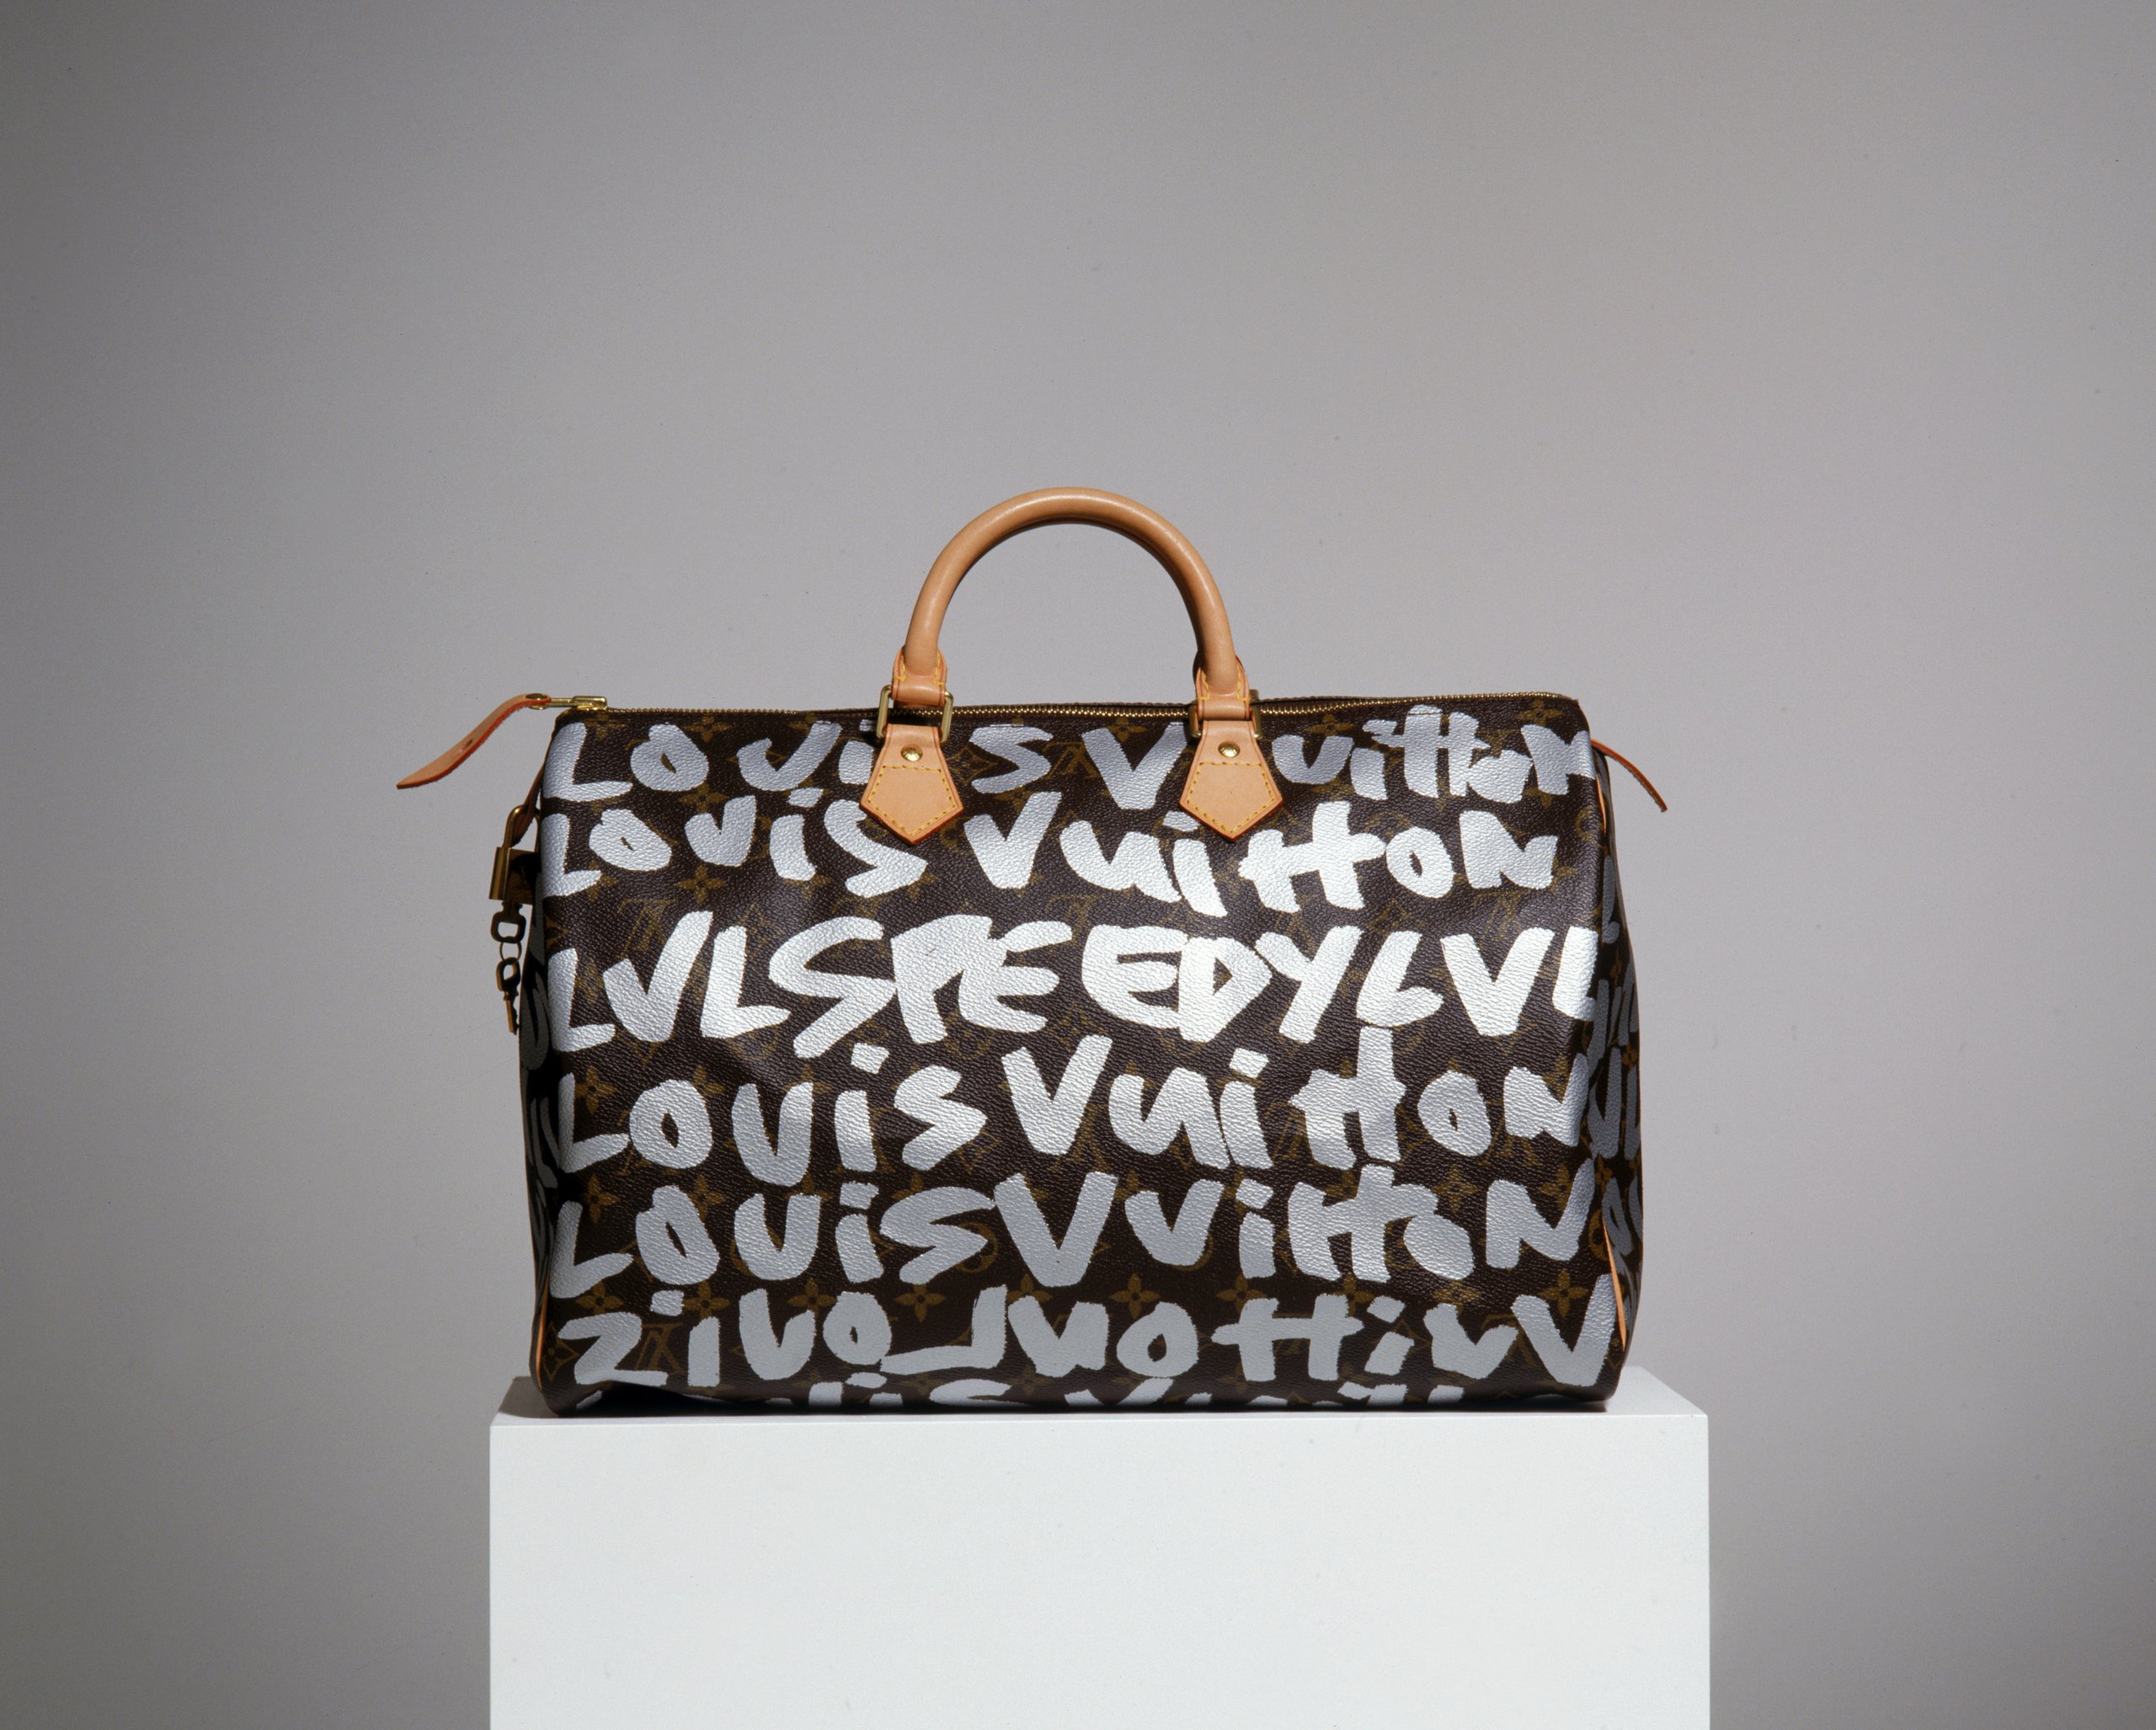 Powerhouse Collection - 'Speedy' travelling bag and packaging by Marc Jacobs  for Louis Vuitton